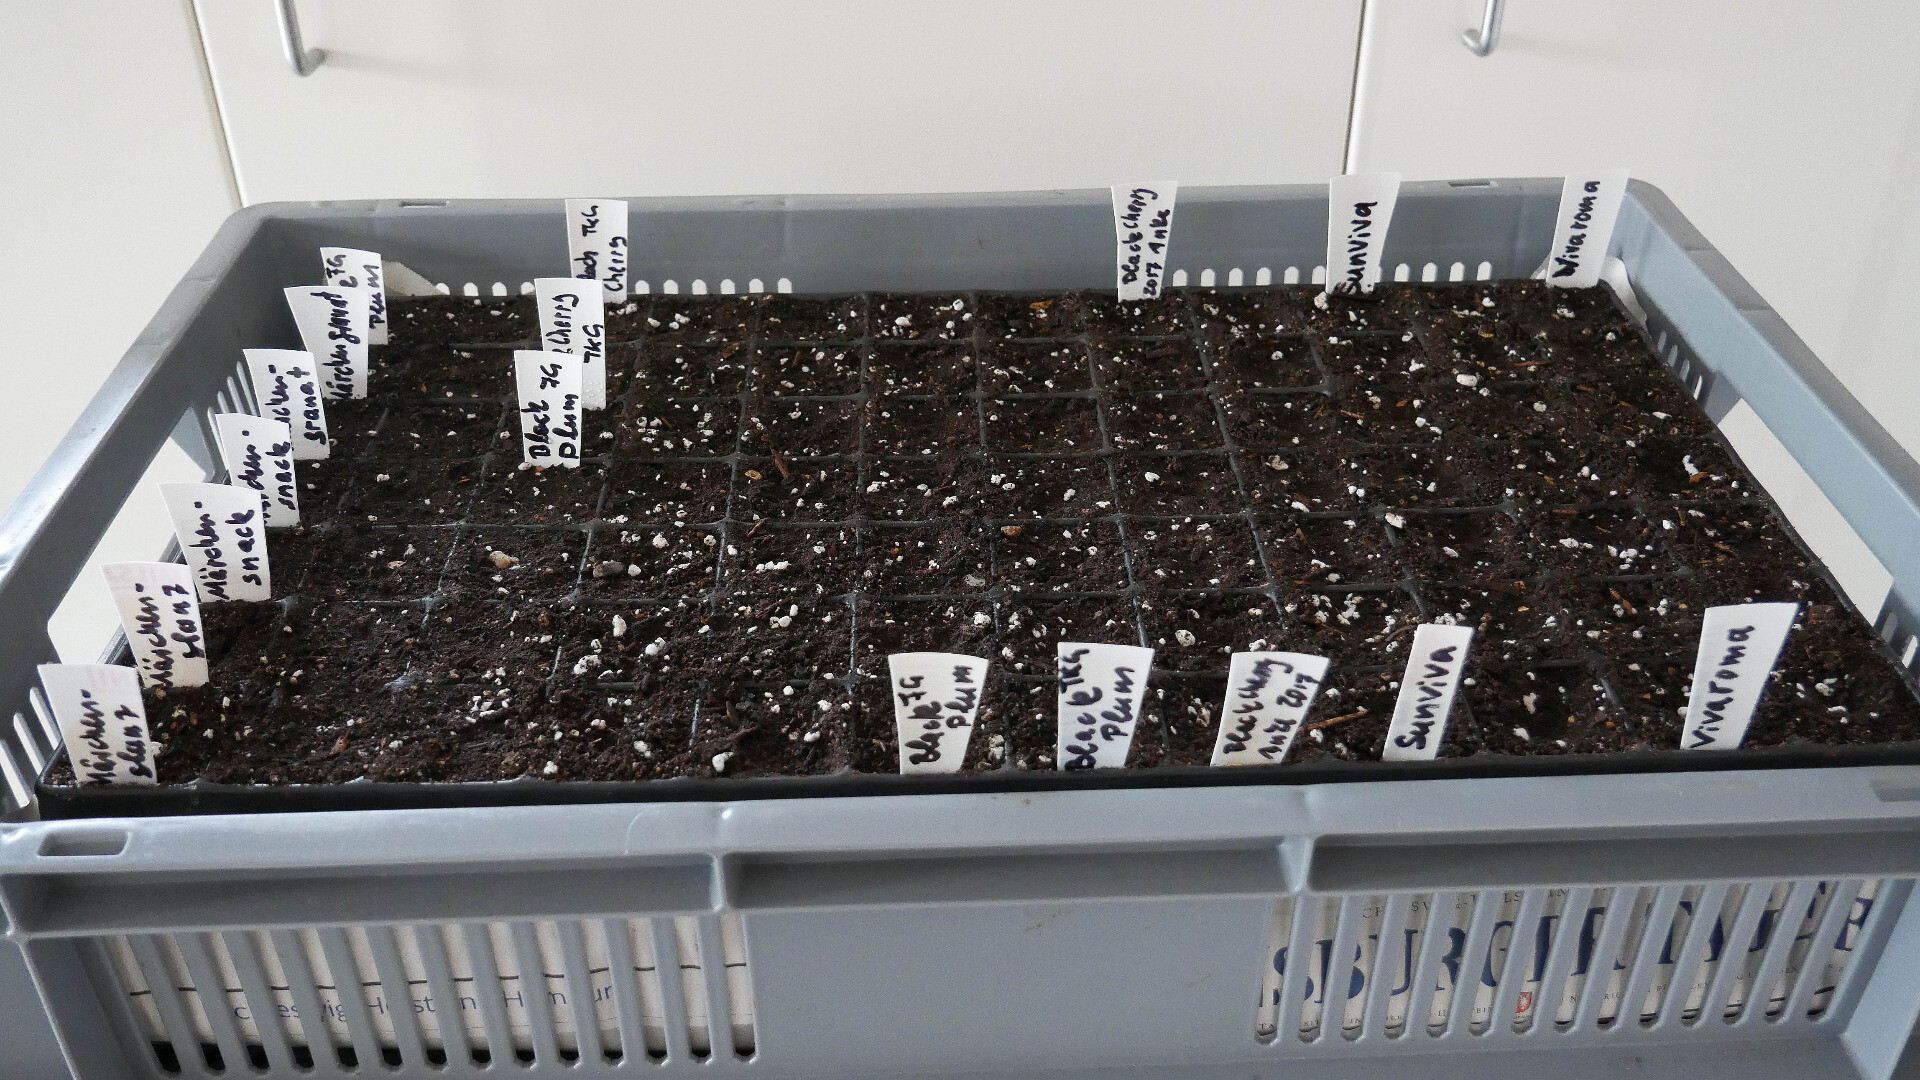 module seed tray in a box with labels showing names of tomato varieties